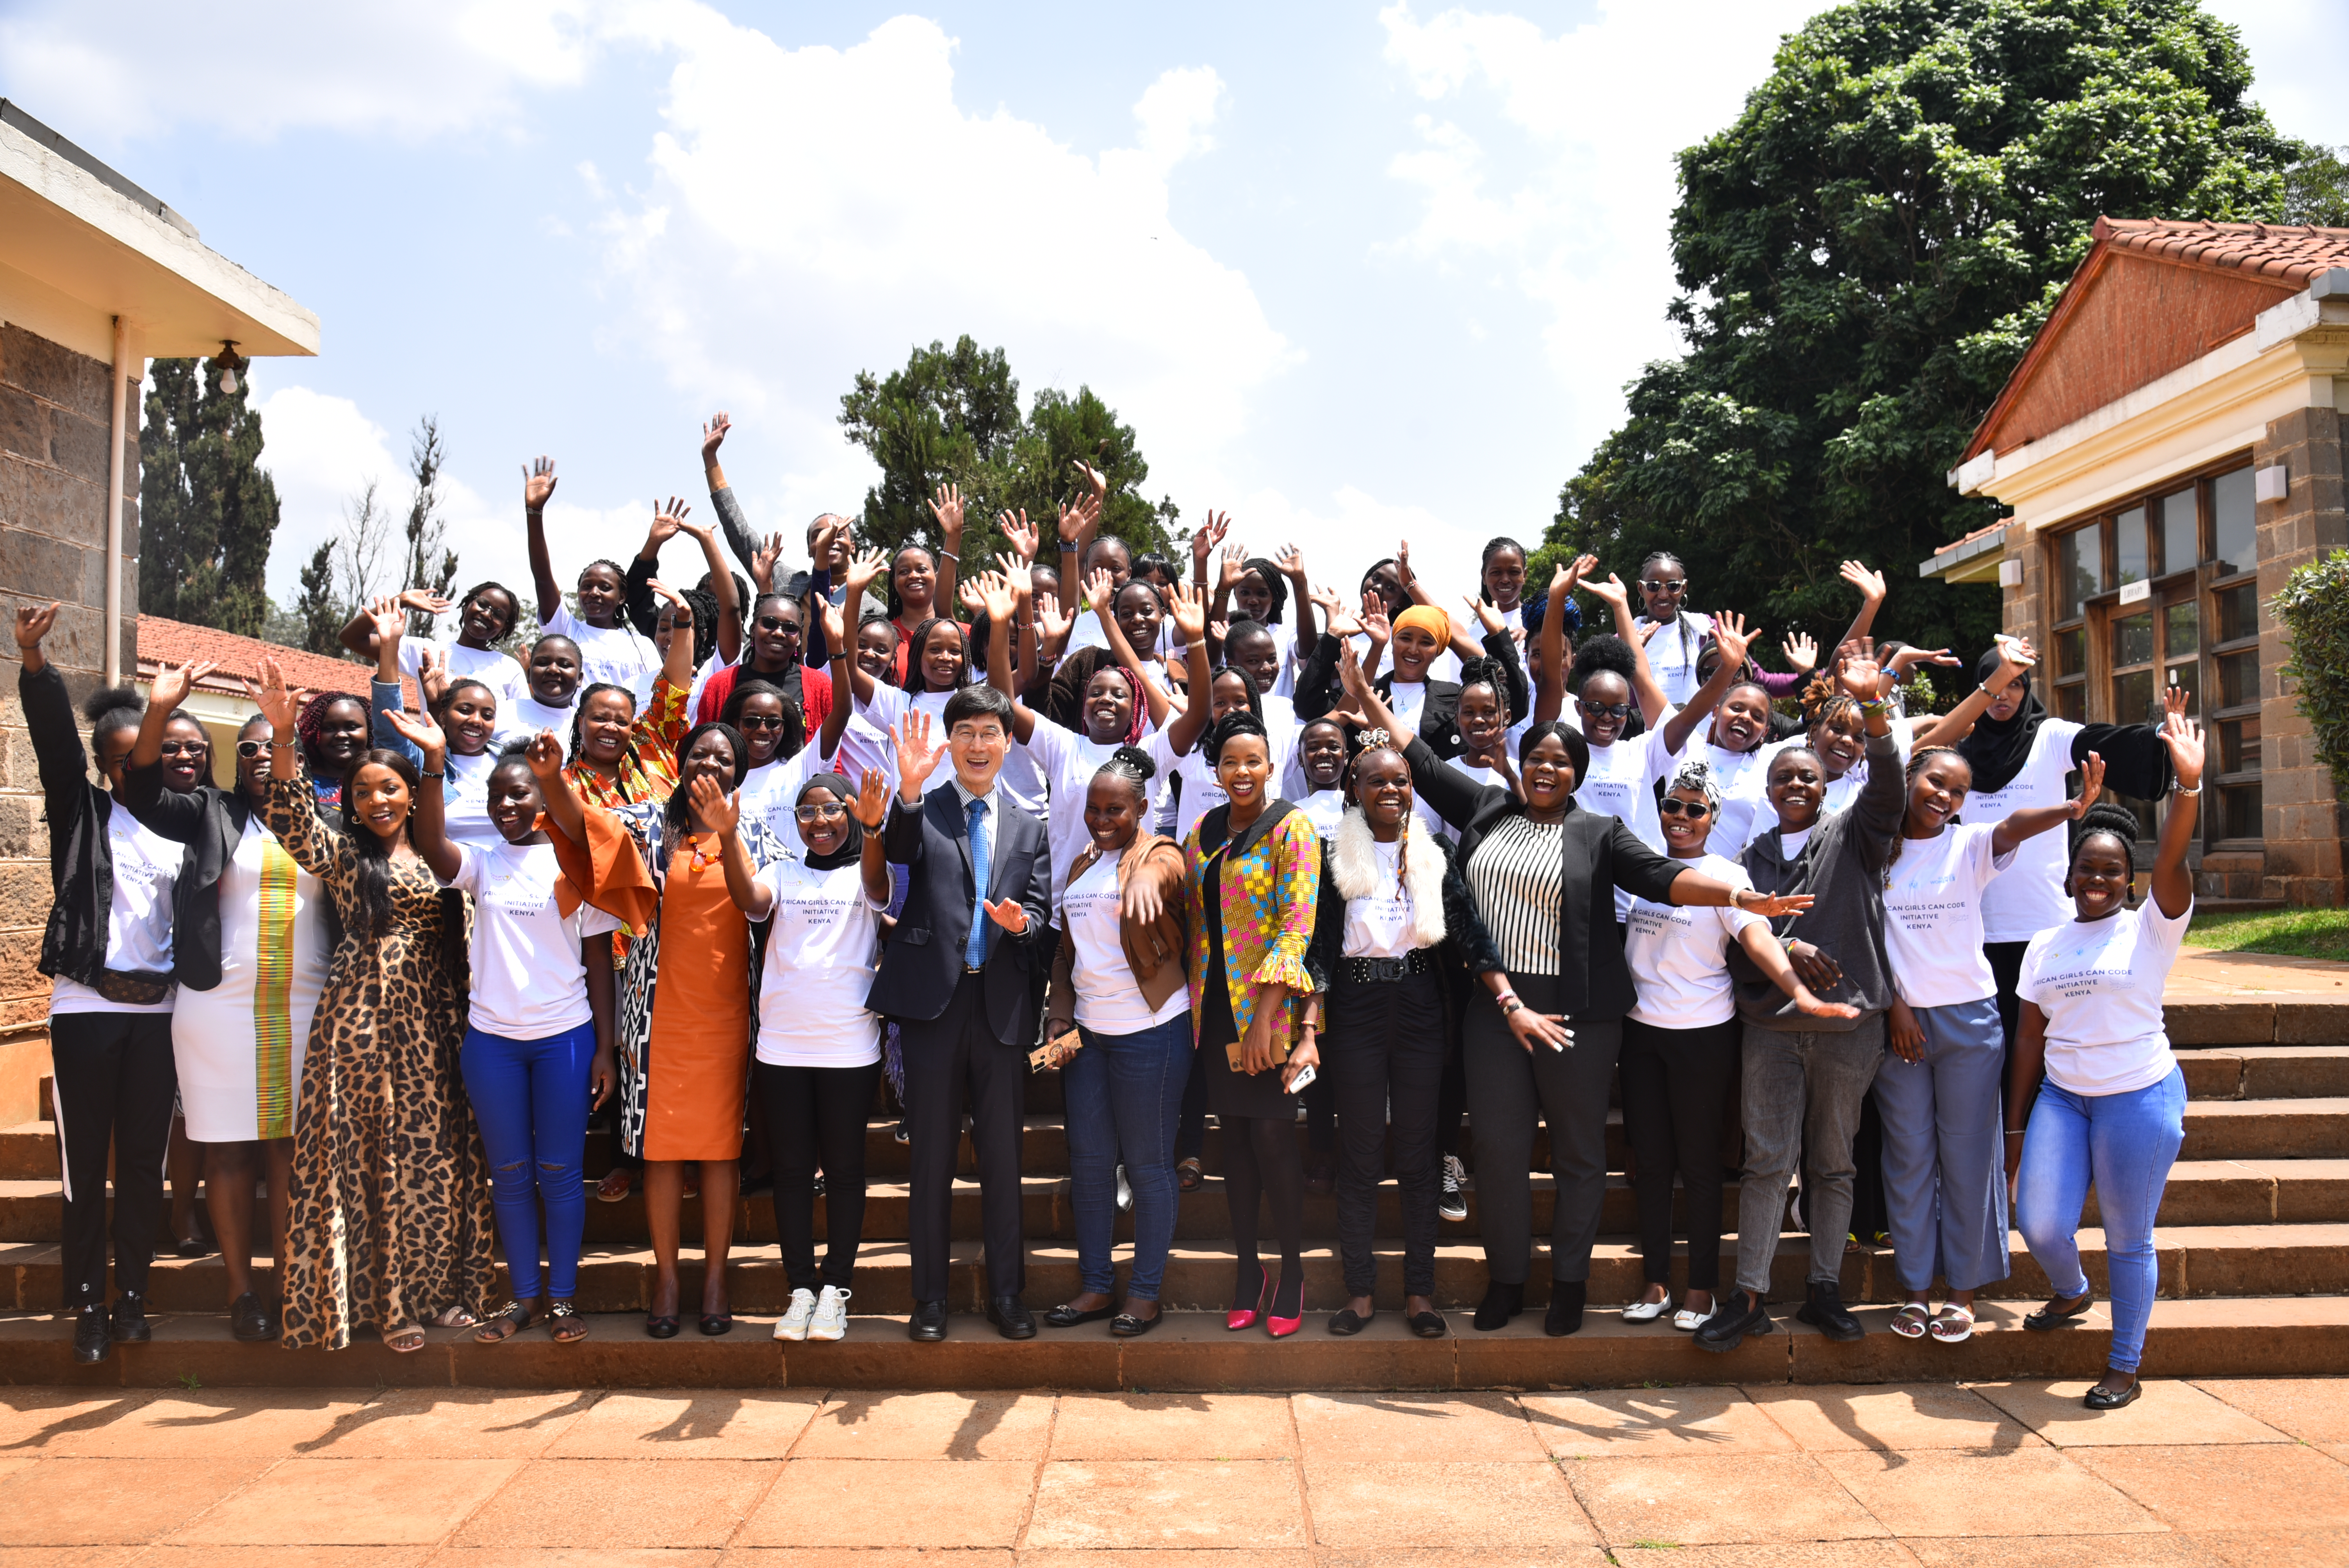 Students and AGCCI partners group photo during Kenya's first coding camp. Photo: UN Women/Luke Horswell